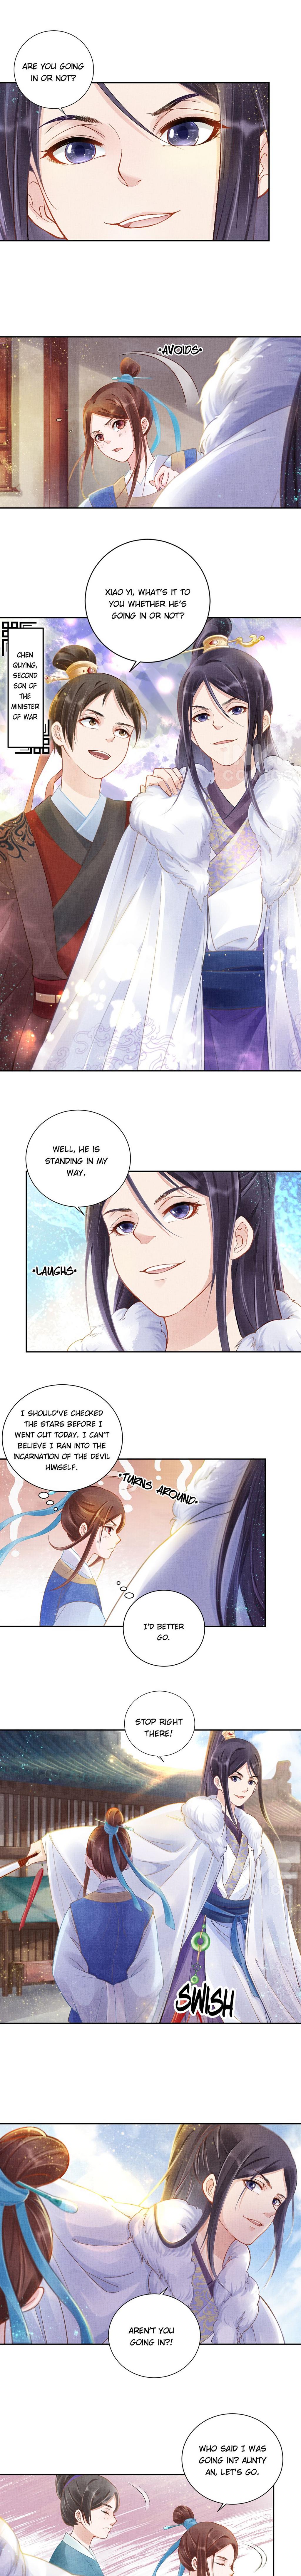 Spoiled Medical Princess: The Legend Of Alkaid - Page 2